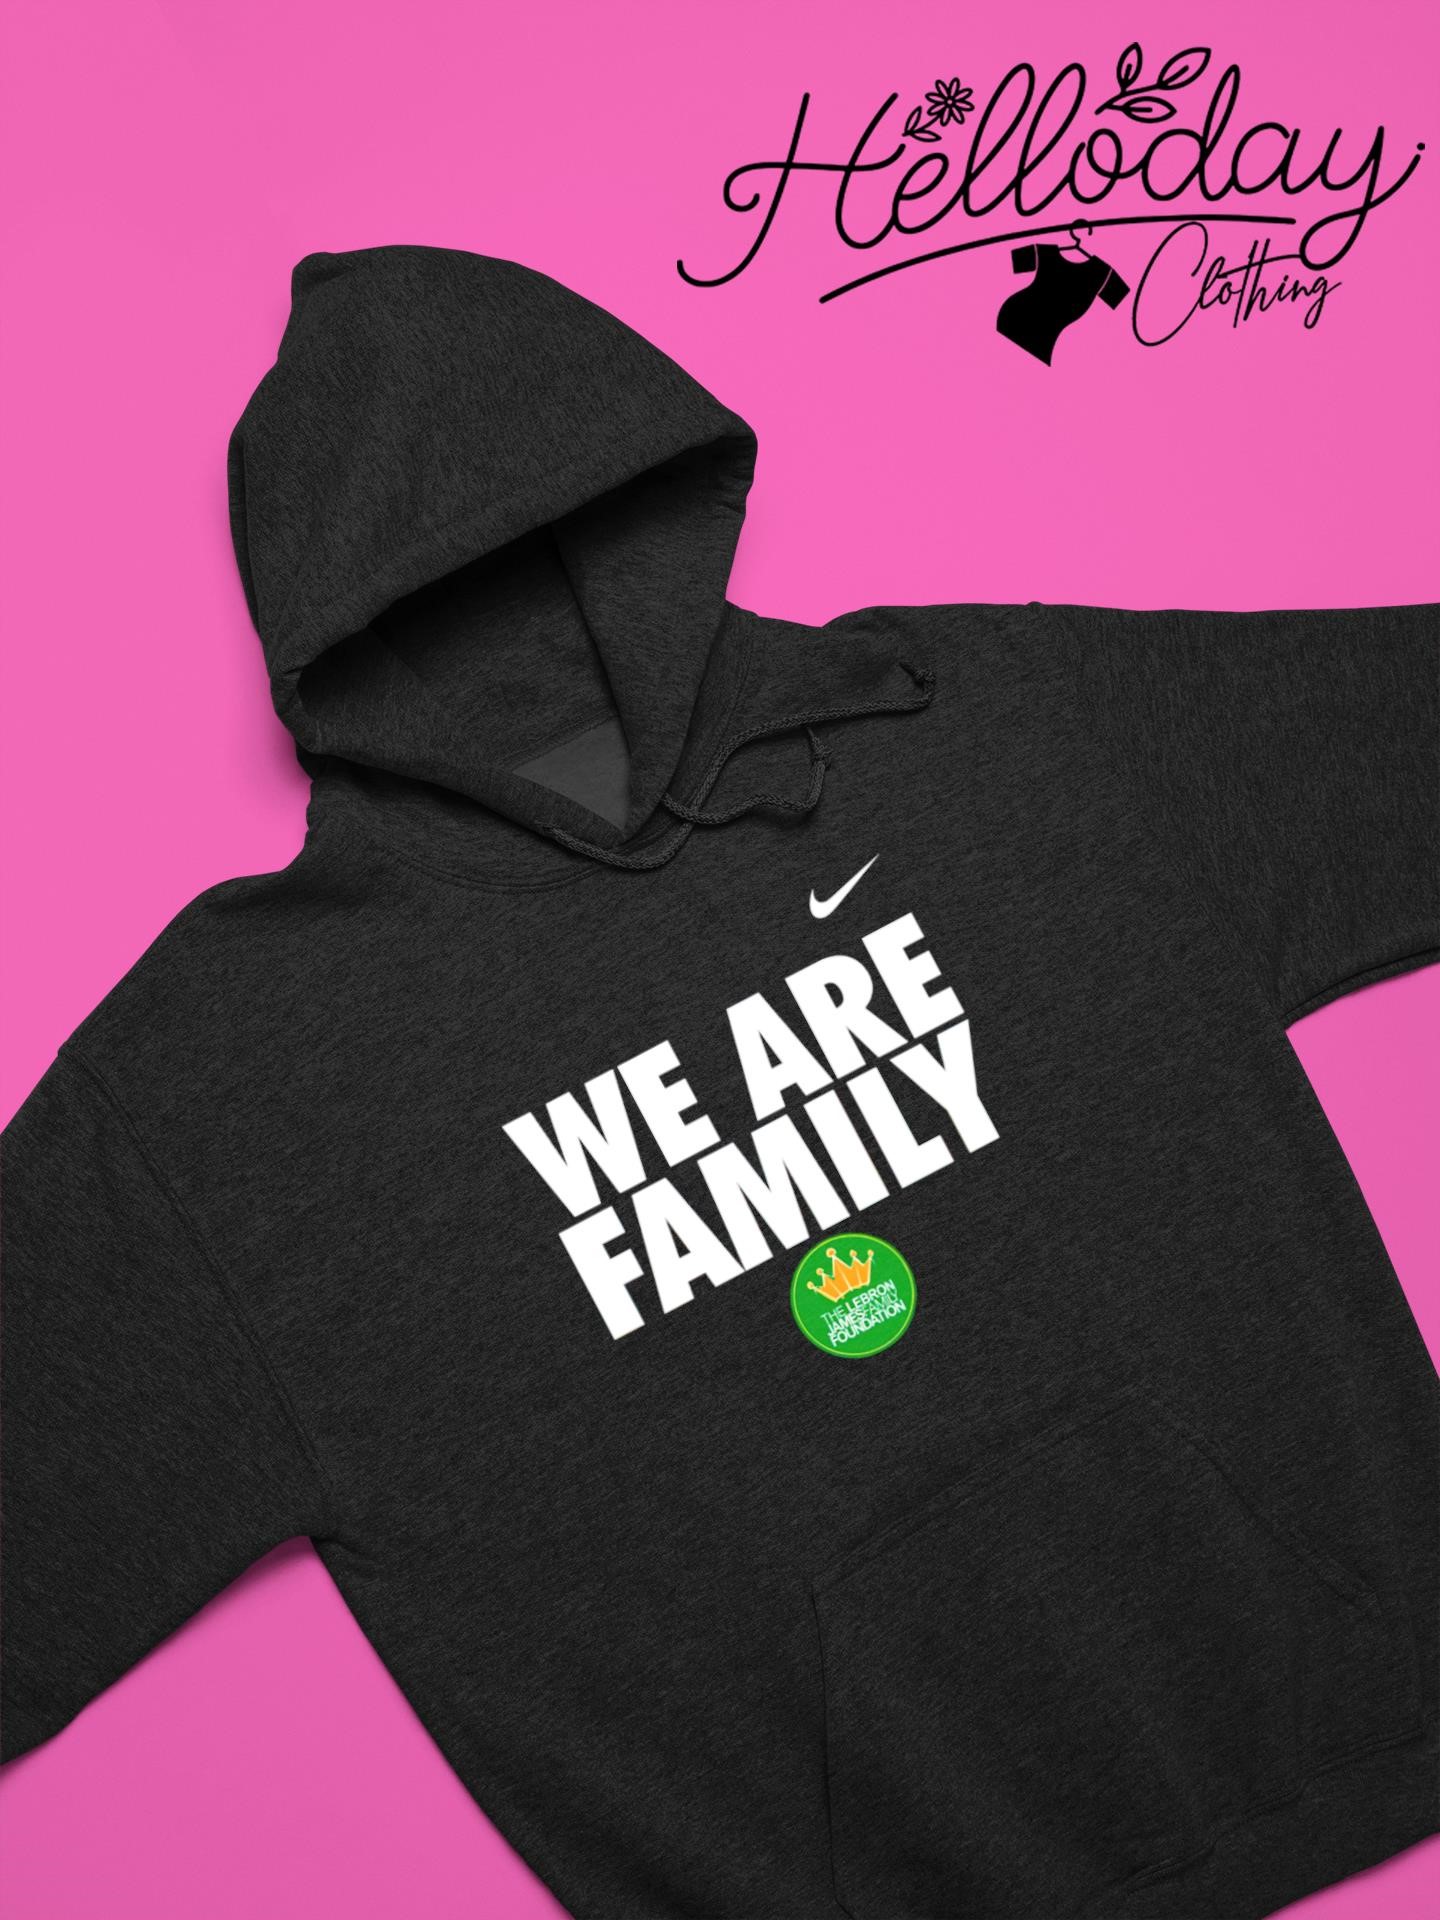 Lebron James Family Foundation We Are Family Tee t-shirt, hoodie,  longsleeve, sweater